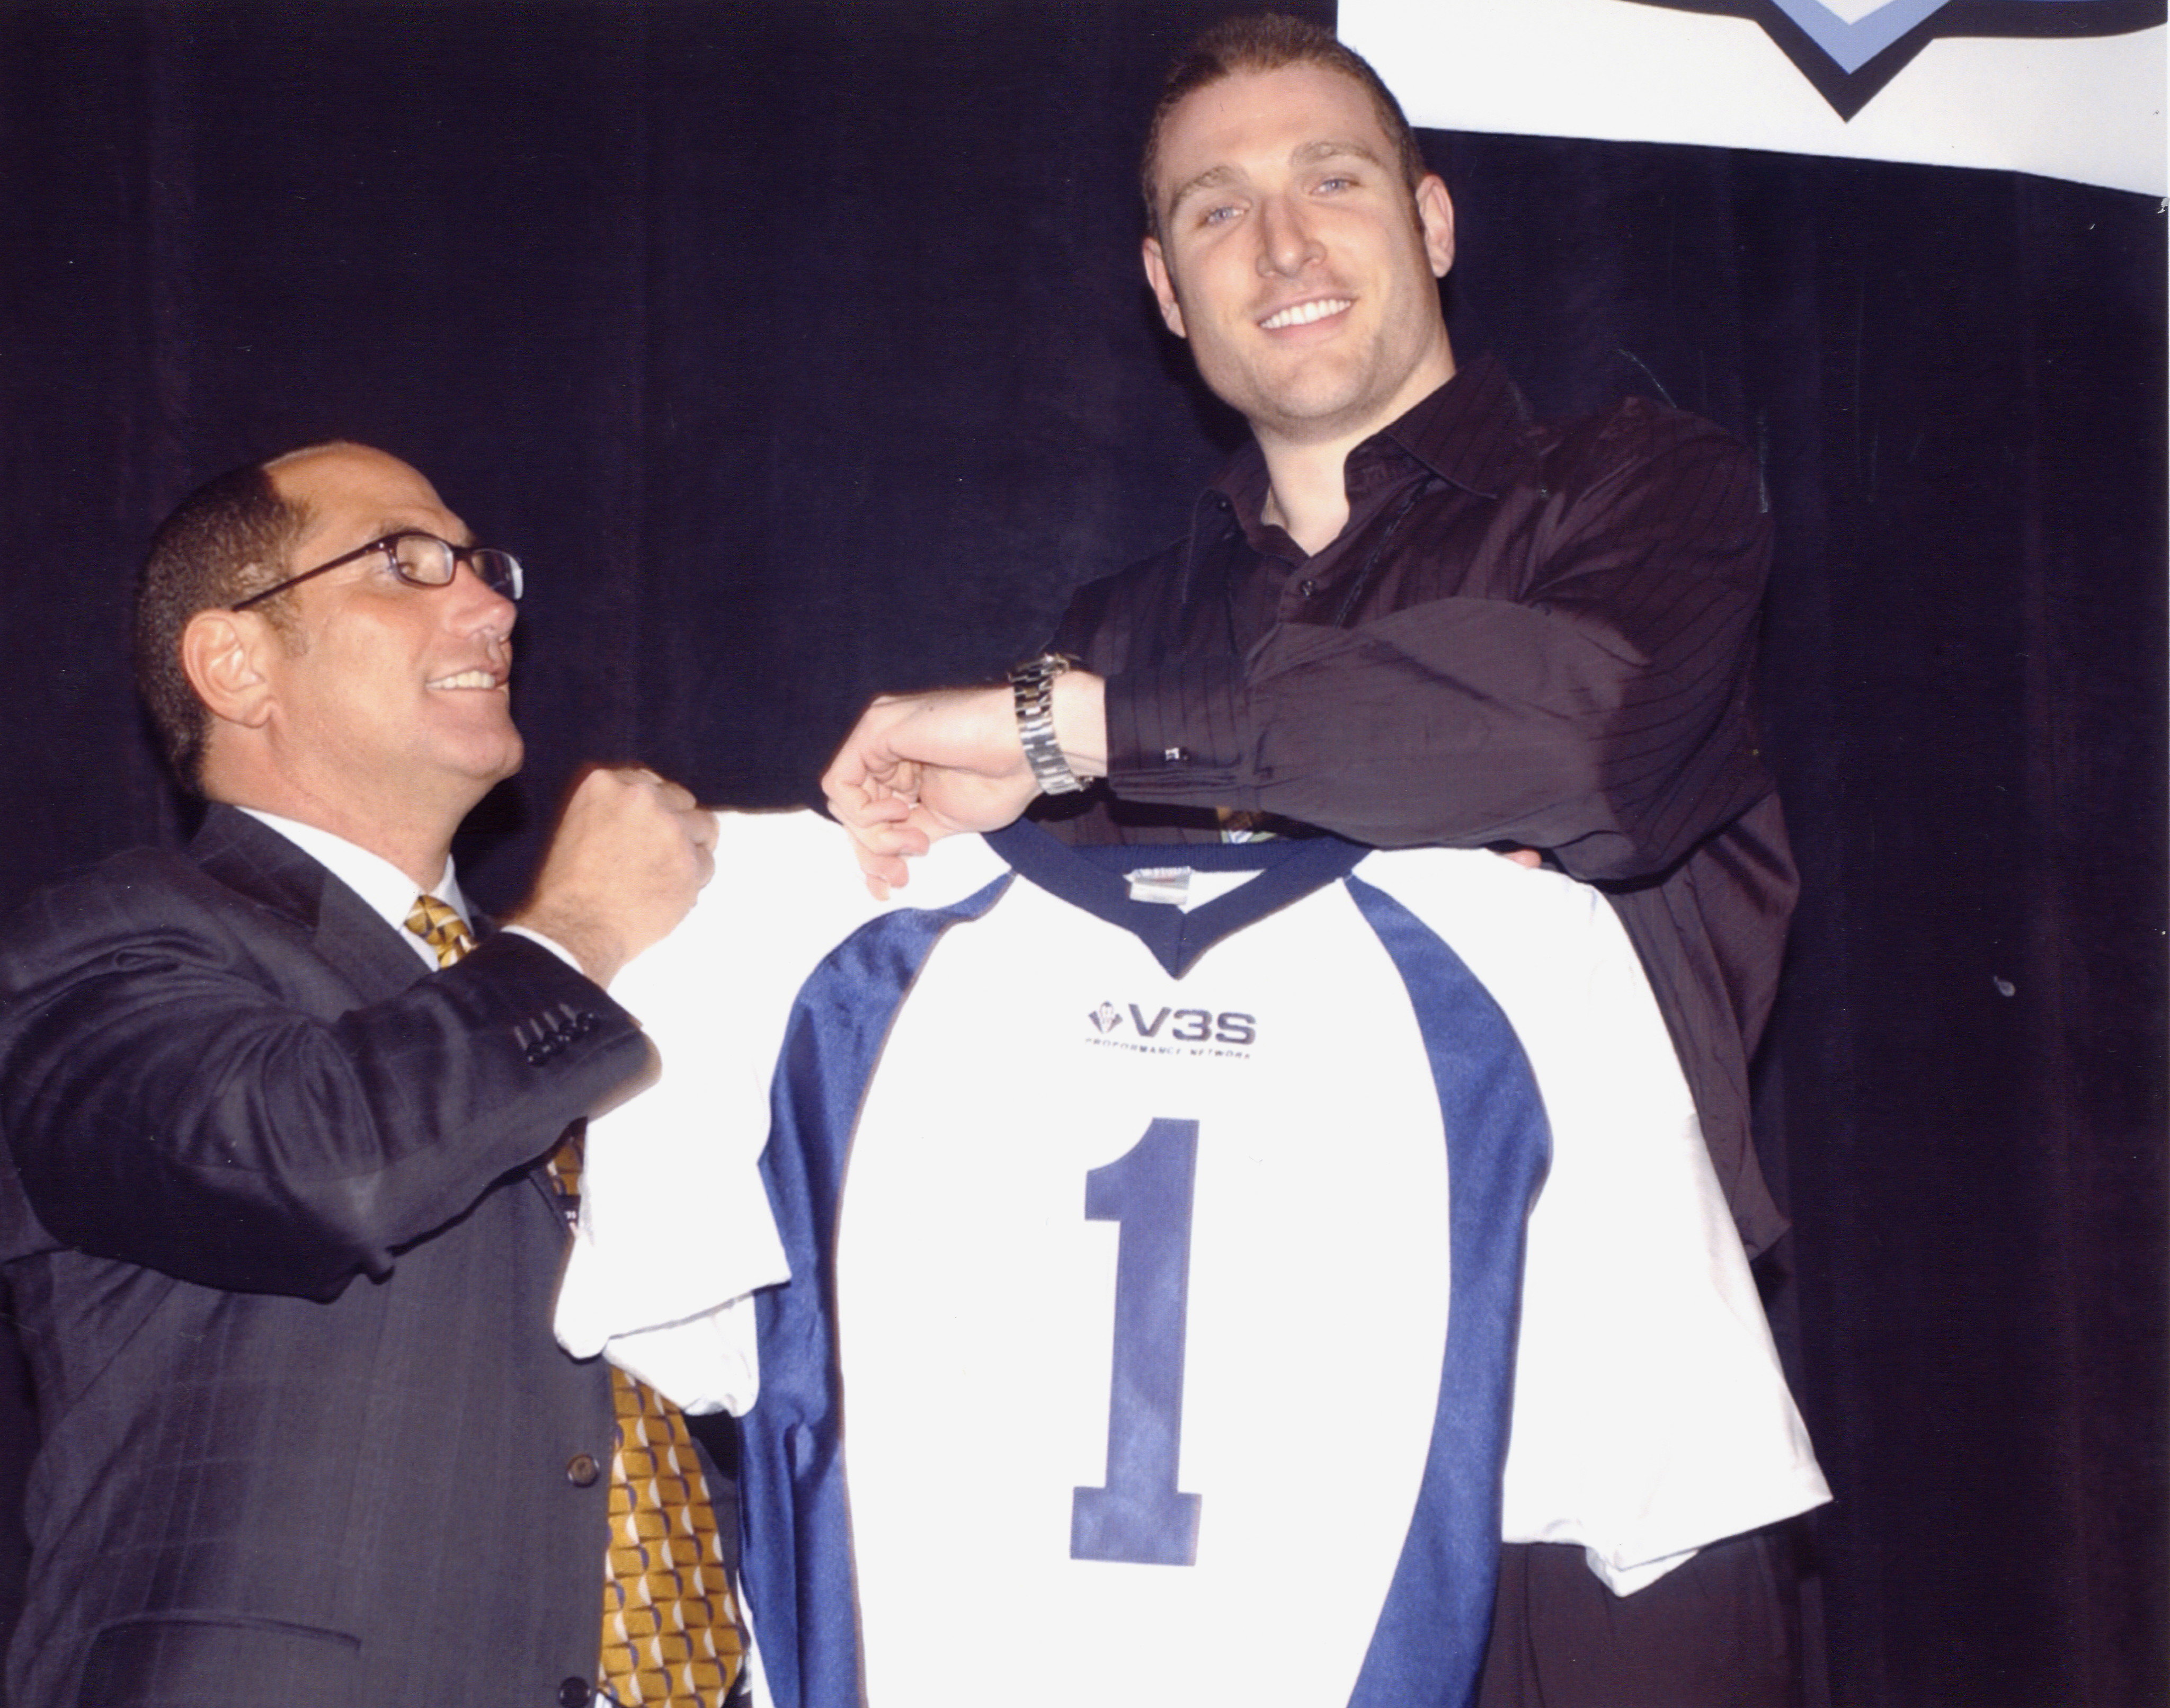 Scottsdale, AZ 5/18/04: Sandy Greenberg (CEO of V3S) announces Peter Cornell as a company spokesperson and first professional basketball player signed to the company.